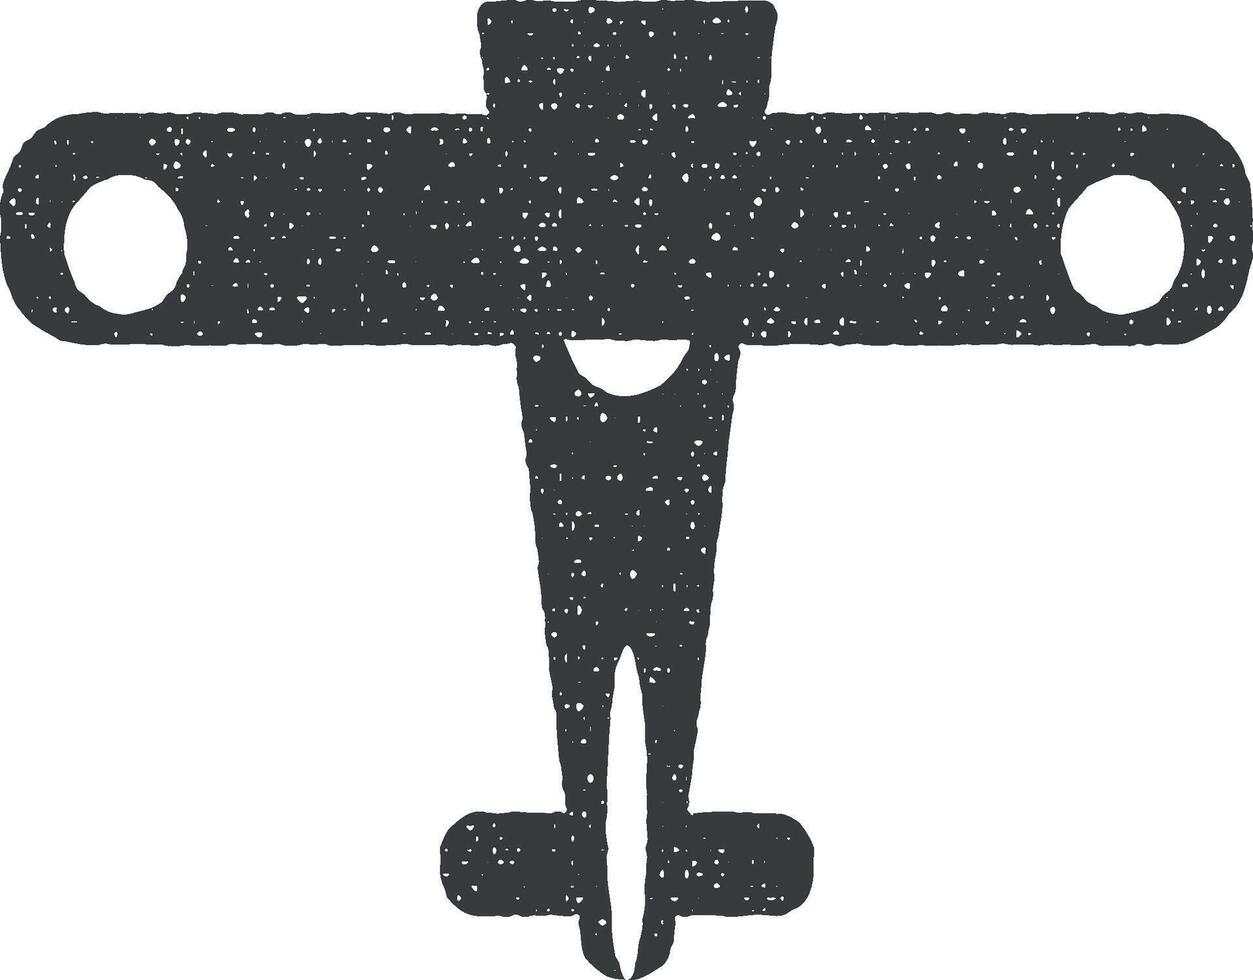 Toy plane vector icon illustration with stamp effect